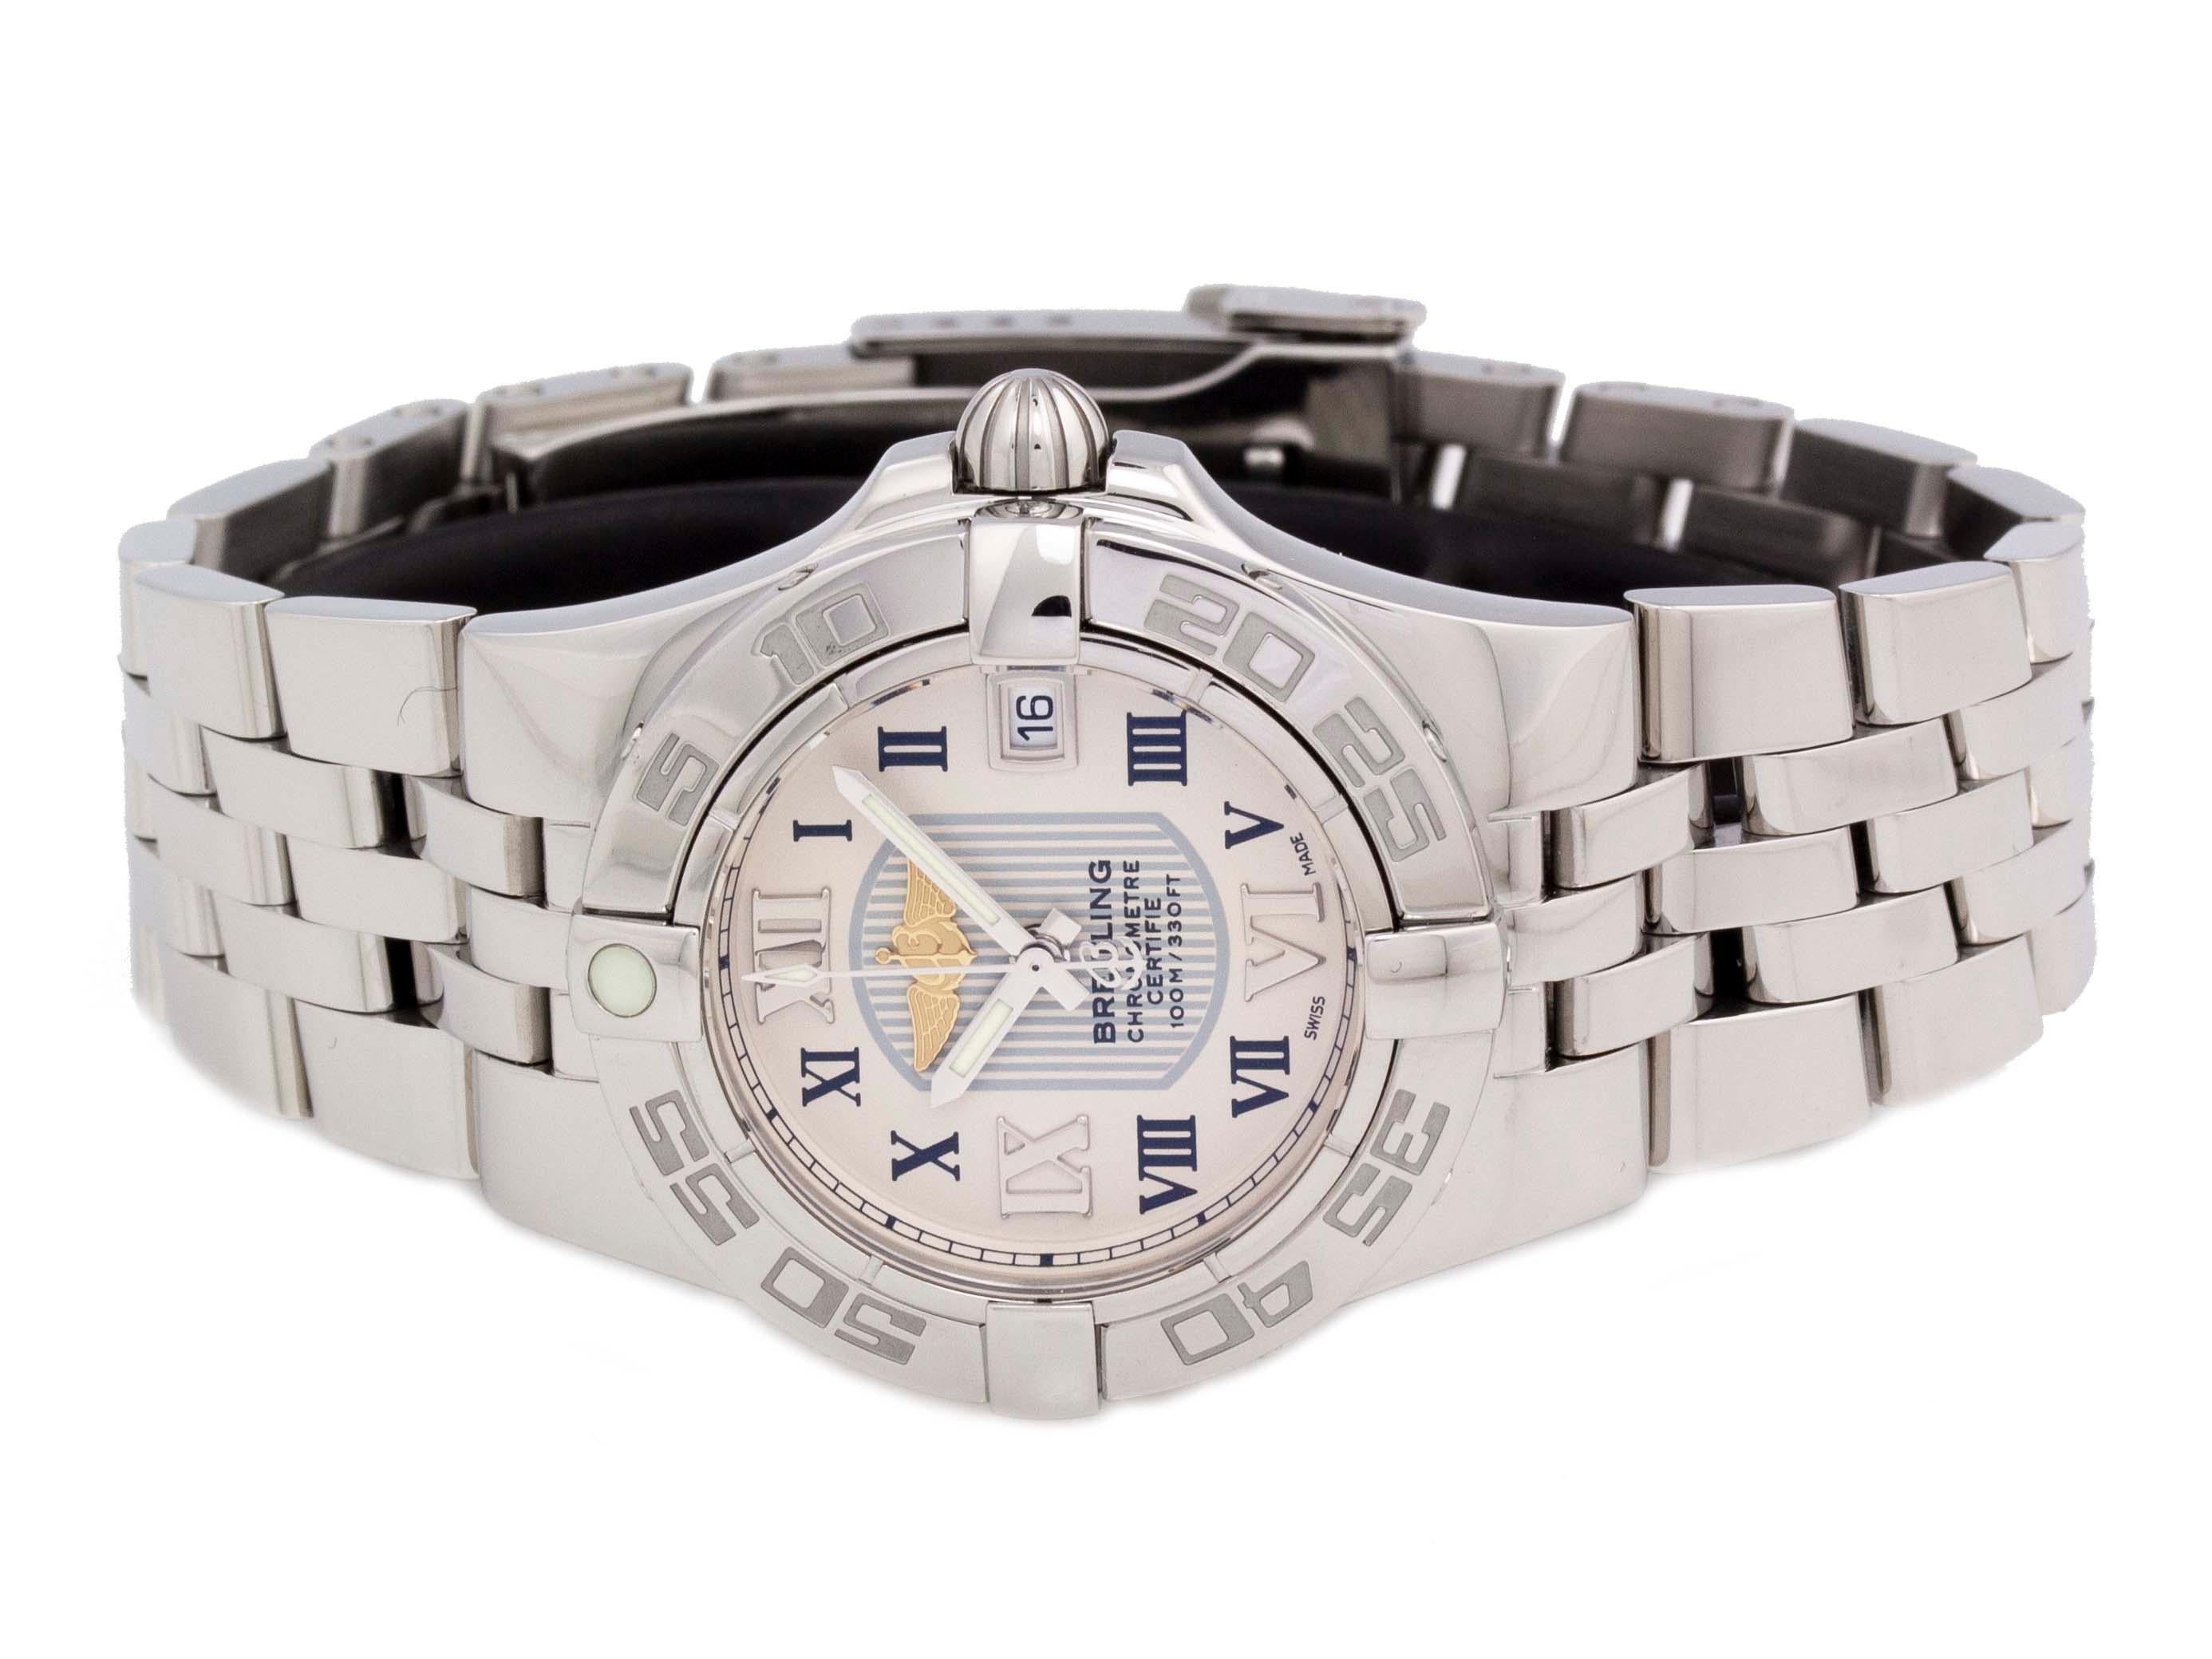 Brand	Breitling
Series	Galactic 30
Model	A71340L2/G670
Gender	Women's
Condition	Excellent Display Model
Material	Stainless Steel
Finish	Polished
Caseback	Solid
Diameter	30mm
Thickness	12.2mm
Bezel	Stainless Steel w/ Numerals
Crystal	Sapphire Scratch